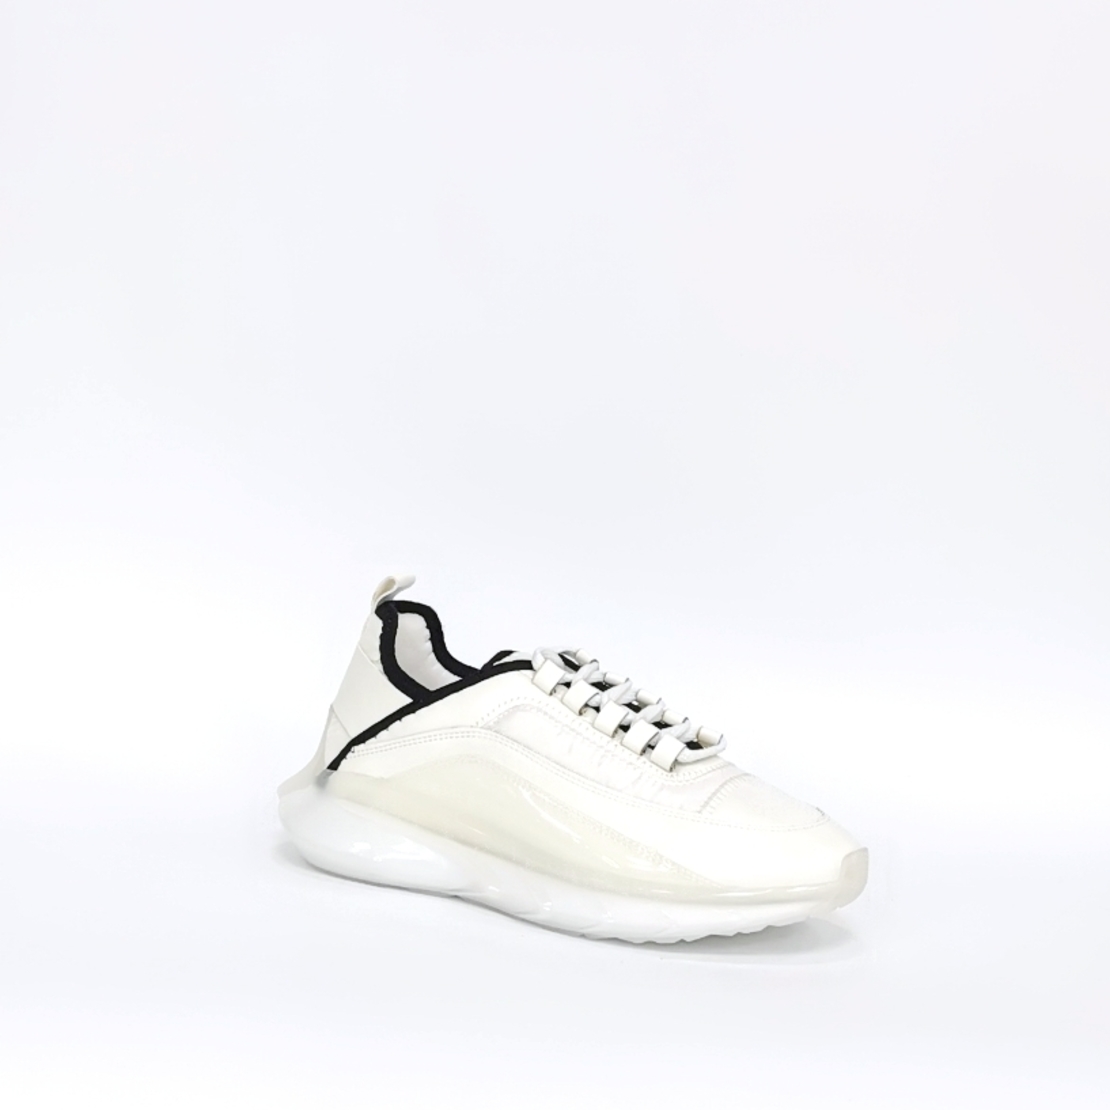 Women's sneakers made of eco leather + textile with anatomical insole in white /7282